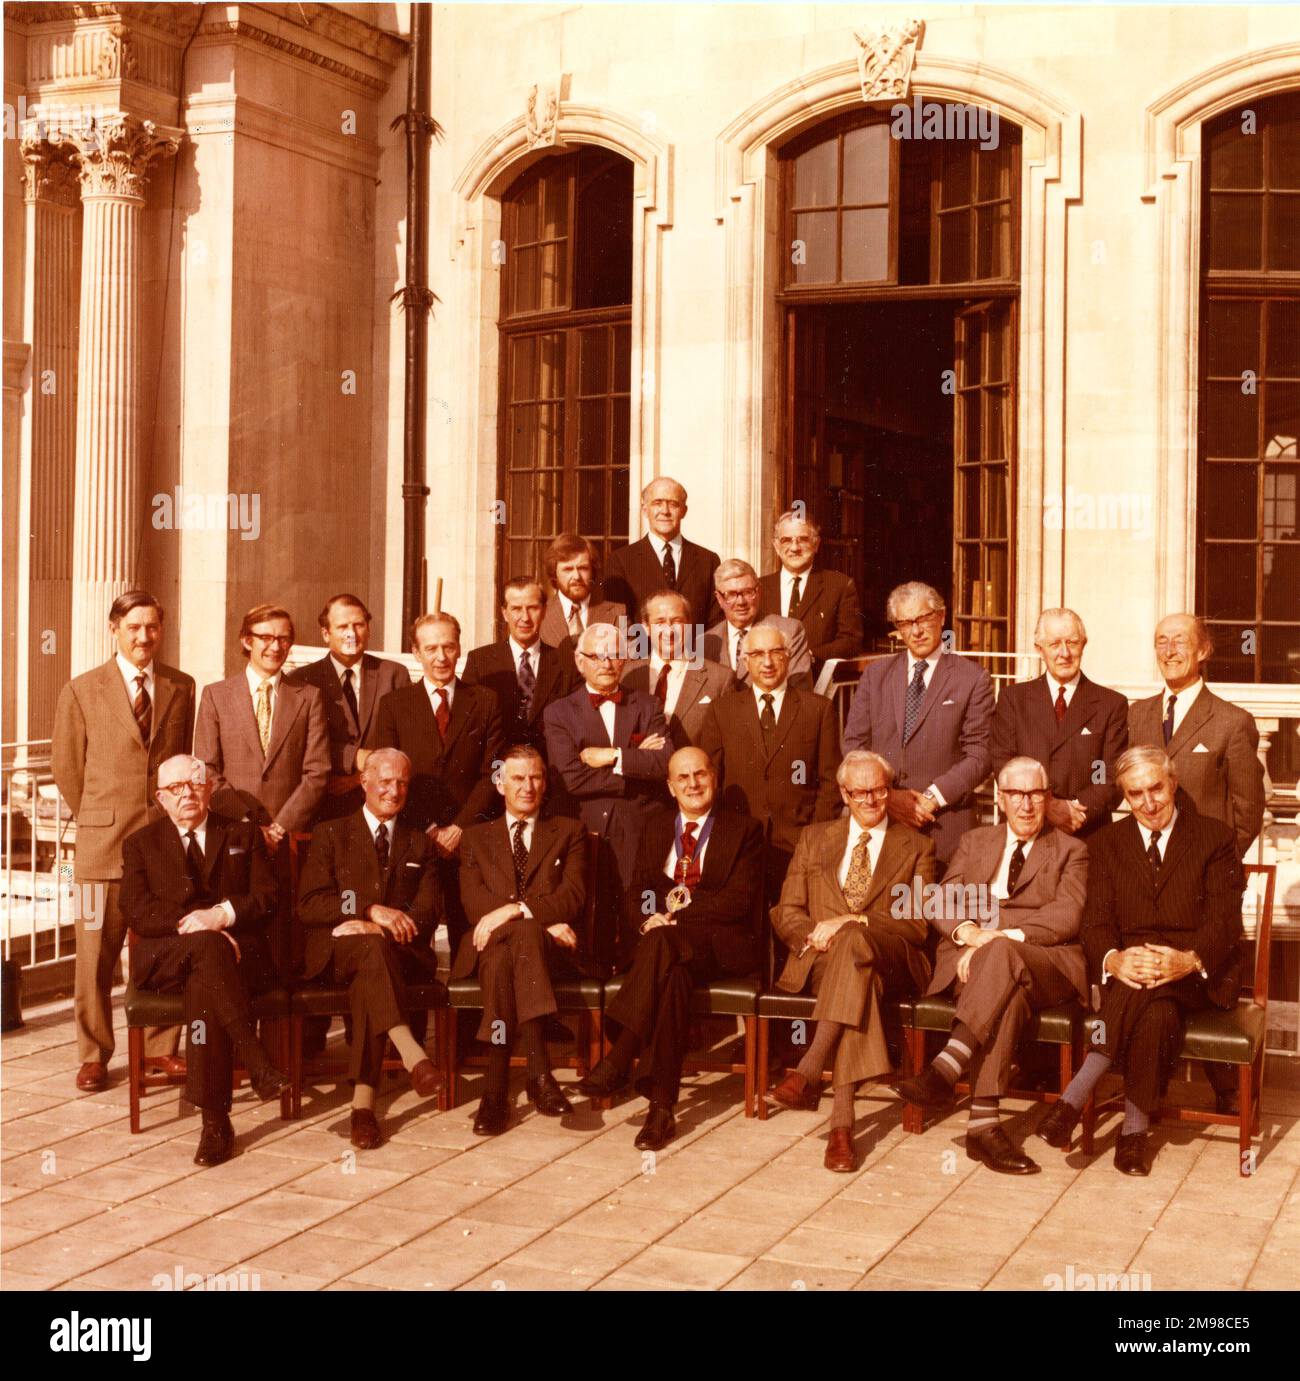 The 1974-1975 Royal Aeronautical Society Council on the terrace at No.4 Hamilton Place, 24 April 1975. Front row from left: Air Cdre Rod Banks, Air Cdre J.R. Morgan, AM Sir Charles Pringle, B.P. Laight, RAeS President; K.G. Wilkinson, S.D. Davies and W. Isbister, President, Australia Division. Second row from left: R.P. Probert, G.M. Moss, D.G. Brown, Capt E.M. Brown, Air Cdr F.C. Padfield, M.J. Brennan, Prof M.G. Farley, H. Zeffert, G. Wansbrough-White, Dr E.S. Moult and L.A. Wingfield, Honorary Solicitor. Rear from left: G. Weller, E.M.J. Schaffter, RAeS Secretary; Dr W.F. Hilton and Capt Stock Photo